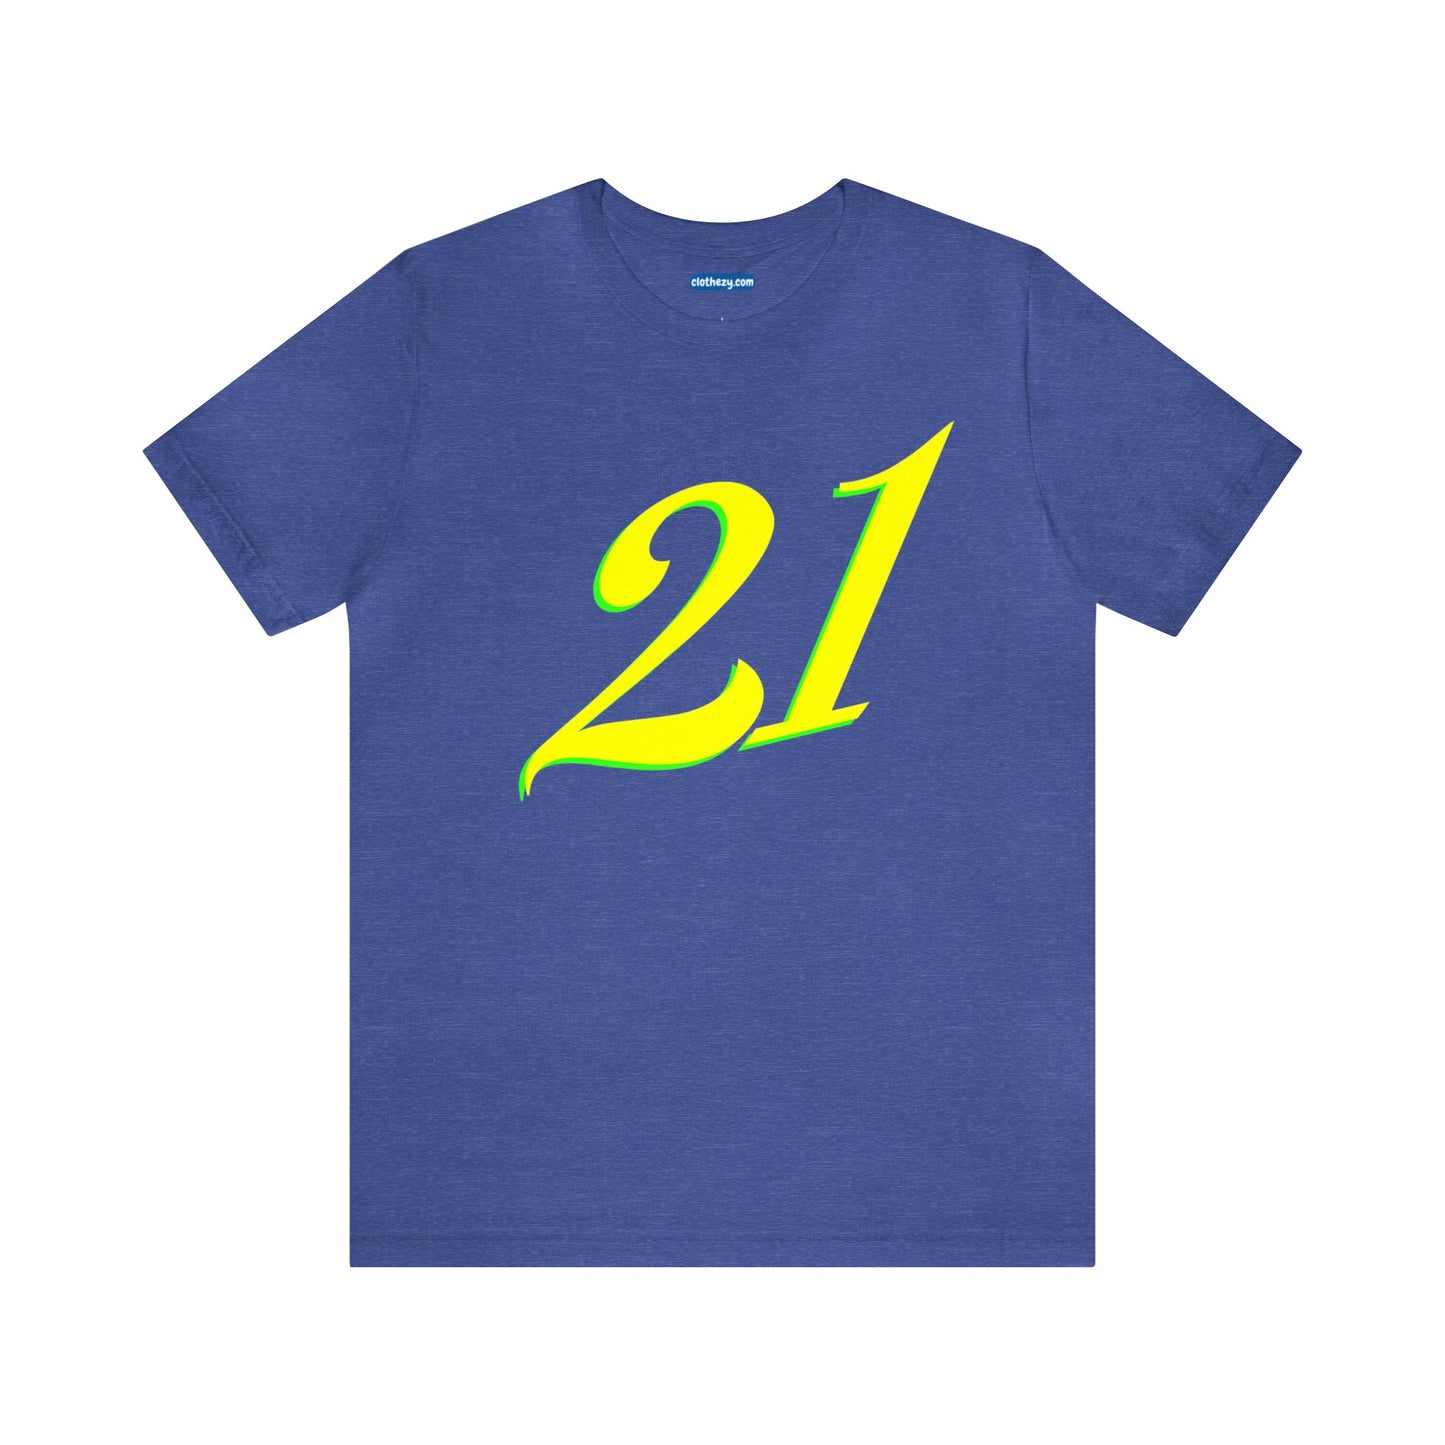 Number 21 Design - Soft Cotton Tee for birthdays and celebrations, Gift for friends and family, Multiple Options by clothezy.com in Navy Size Small - Buy Now